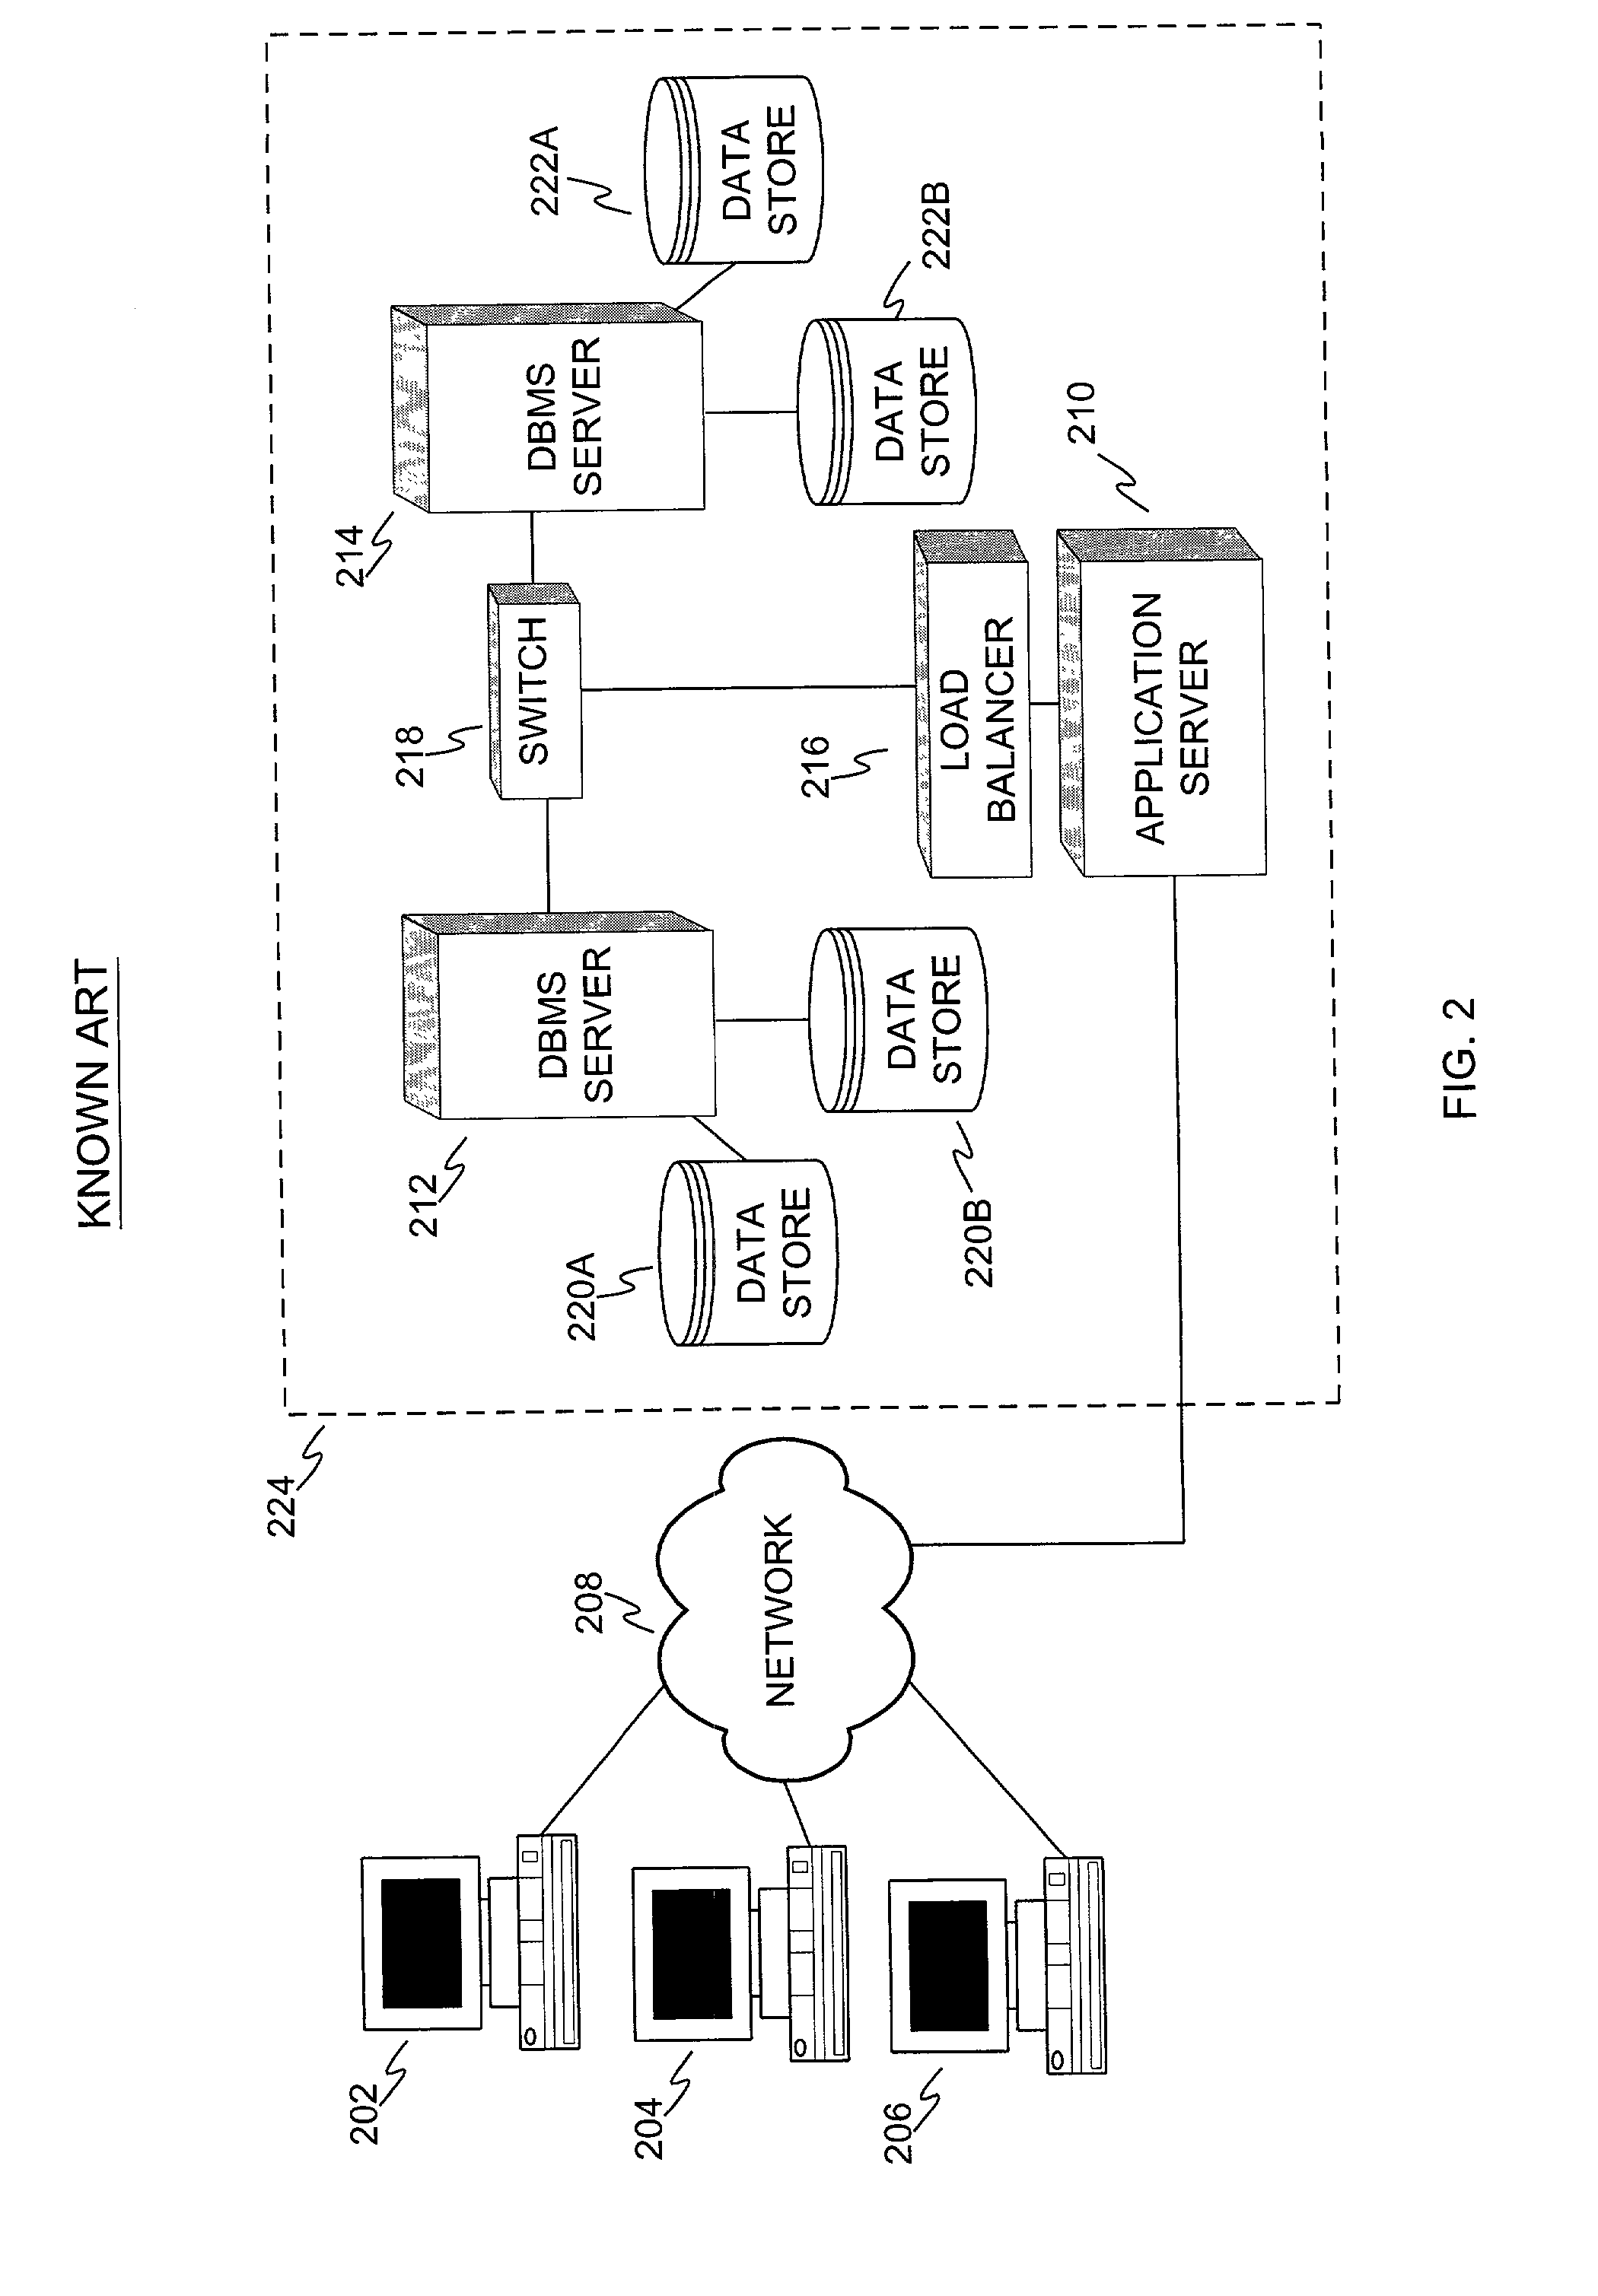 Systems and methods for managing distributed database resources